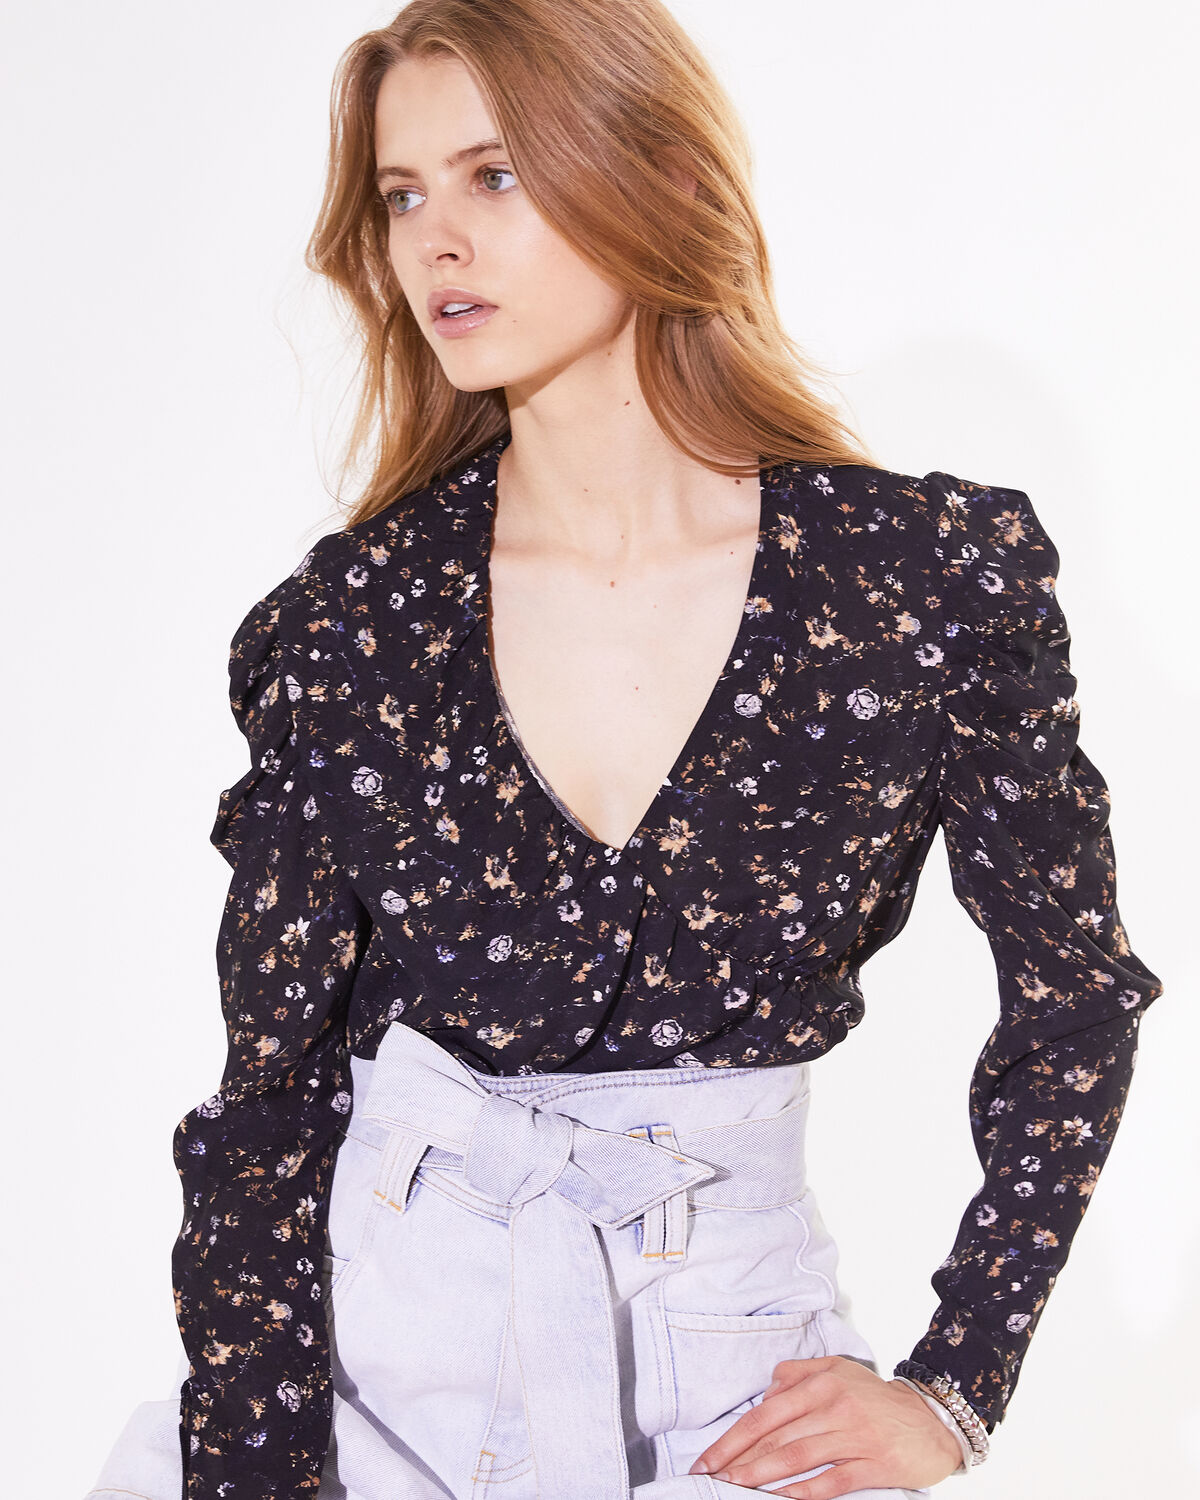 Photo of IRO Paris Syrup Top Black And Orange - With Its Floral Motif, This Top Is Sublimated By Its Flounced Neckline And Puffy Shoulders. Wear It With Faded High Waist Pants For A Feminine And Modern Silhouette. Fall Winter 19